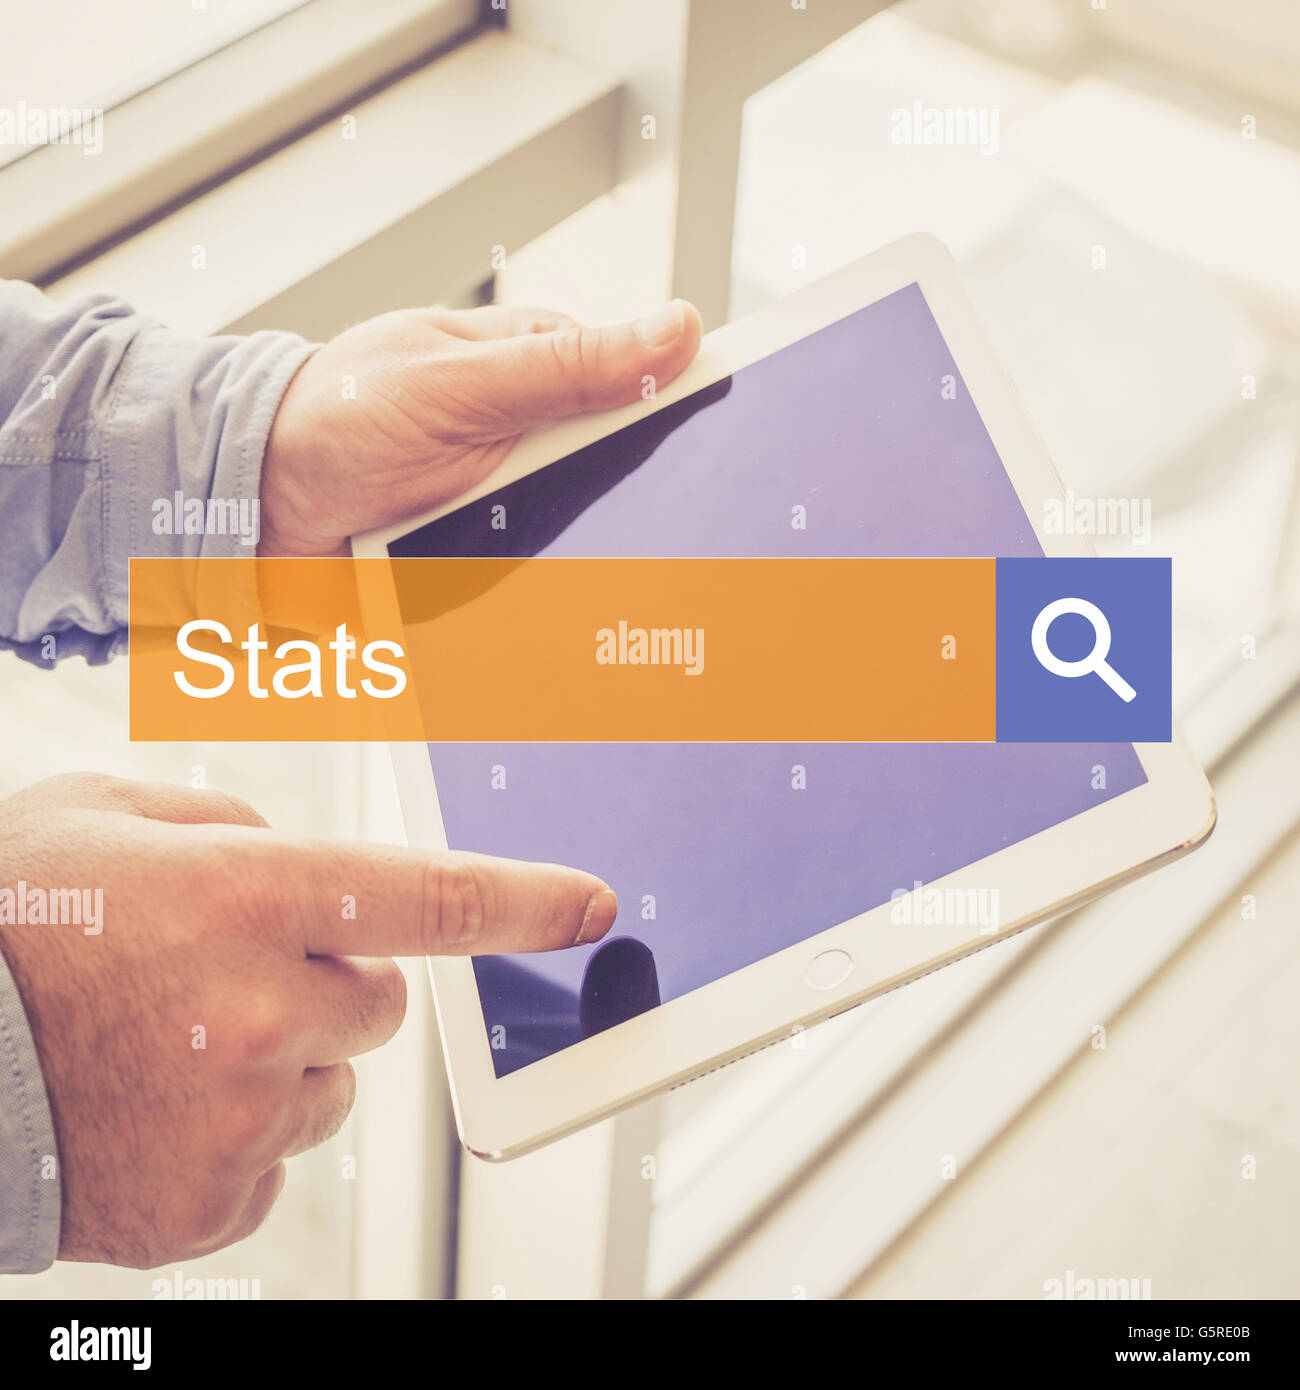 SEARCH TECHNOLOGY COMMUNICATION  Stats TABLET FINDING CONCEPT Stock Photo